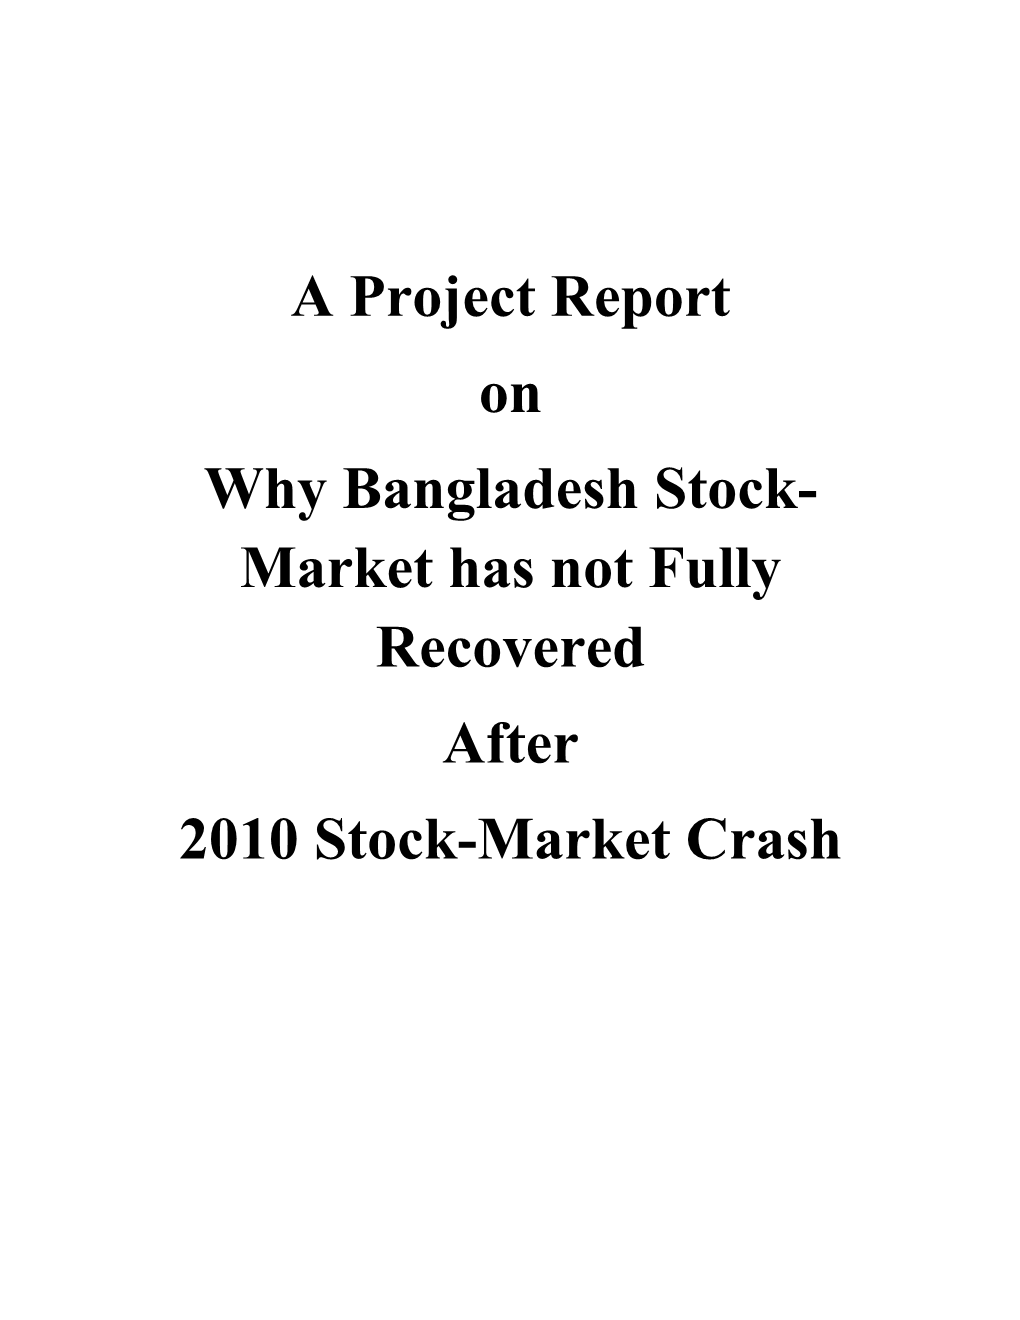 A Project Report on Why Bangladesh Stock- Market Has Not Fully Recovered After 2010 Stock-Market Crash